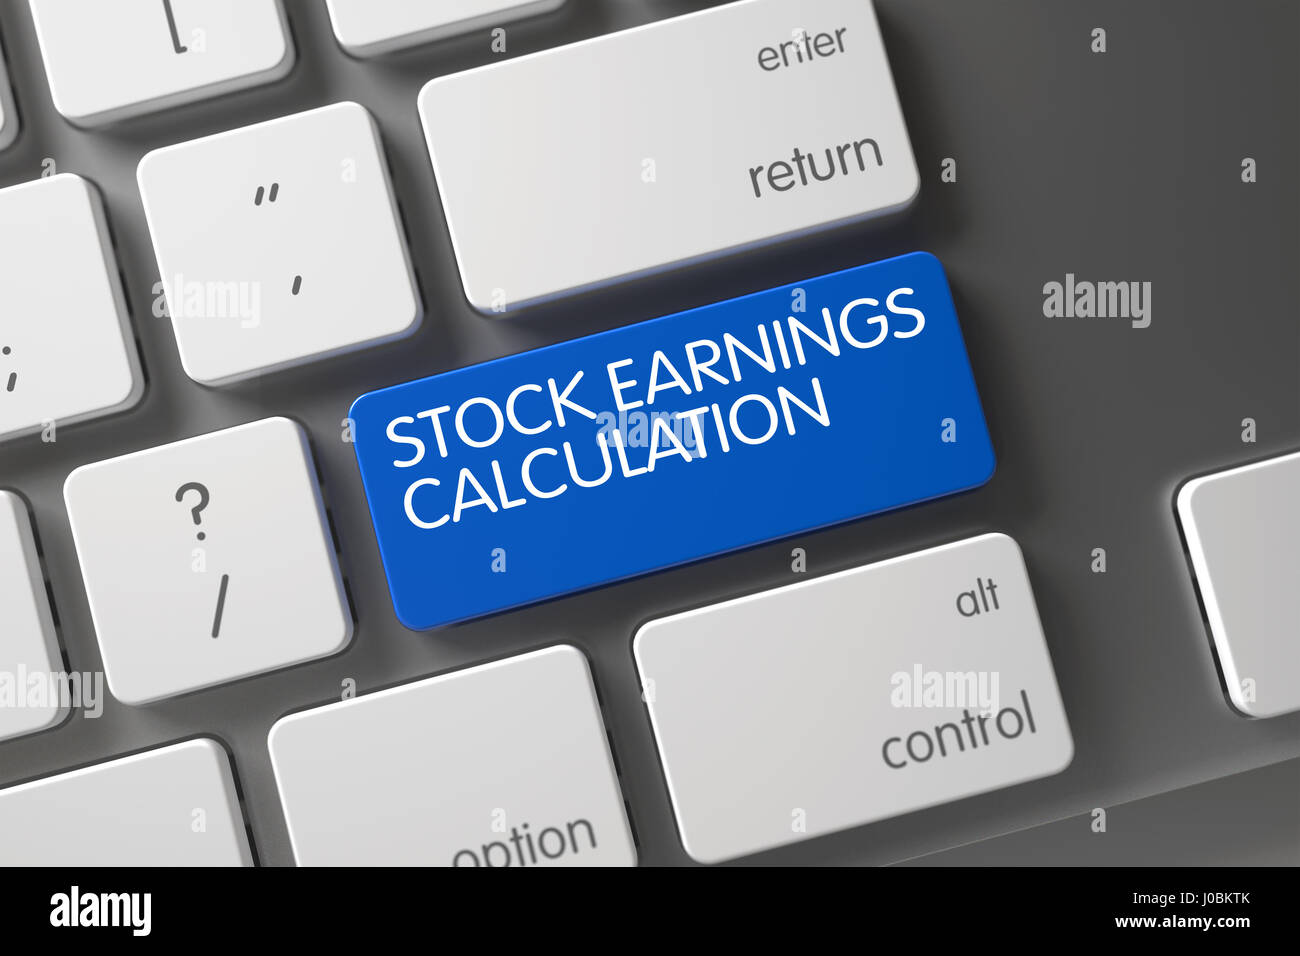 Stock Earnings Calculation Button. 3d. Stock Photo